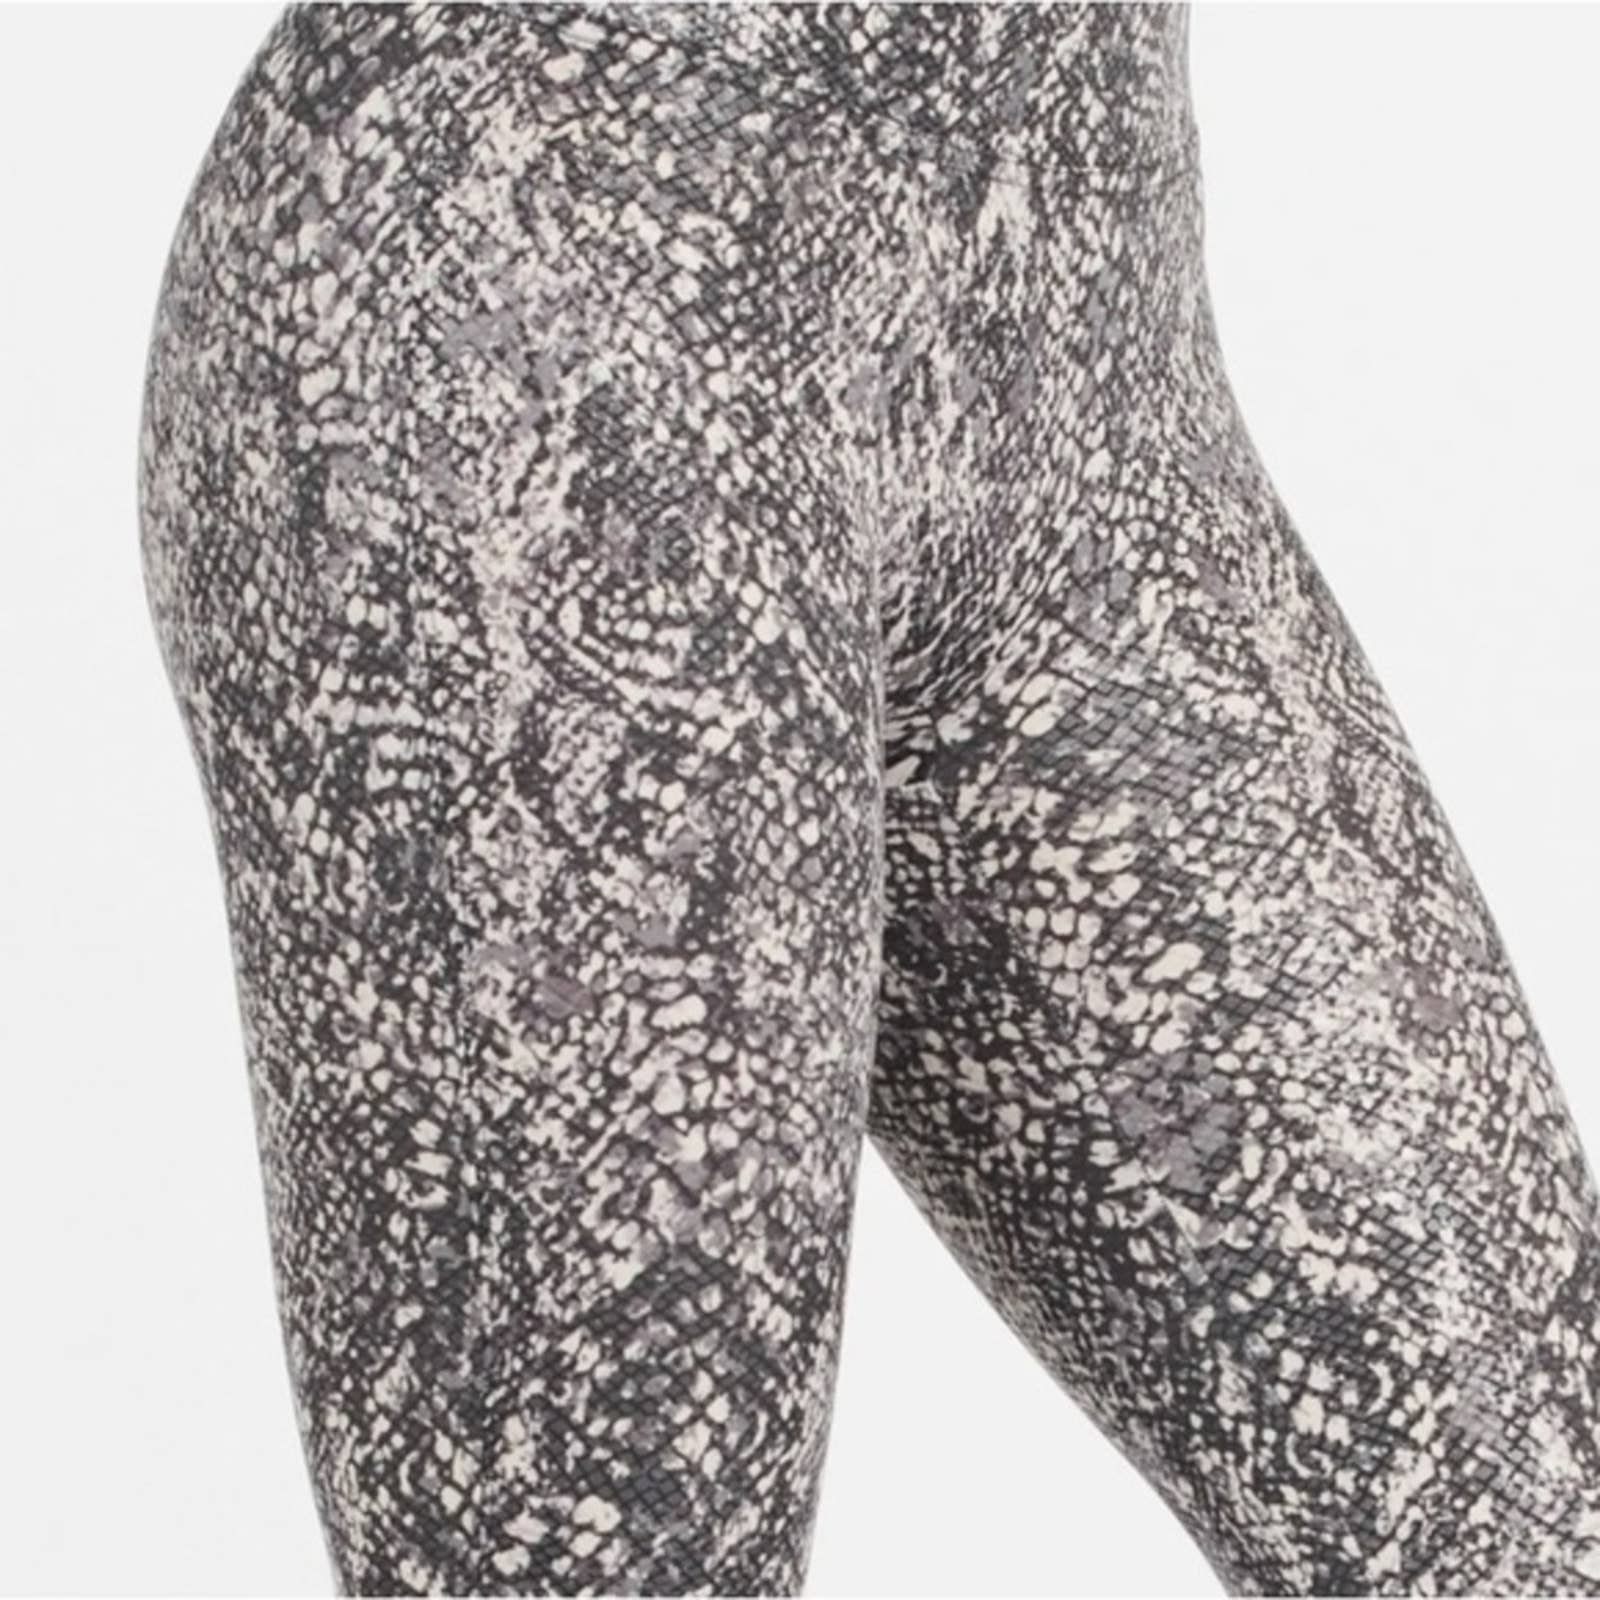 good price NWT Spanx Leggings Faux Leather Snake Grey Shine Size S hetUh8zk4 Outlet Store